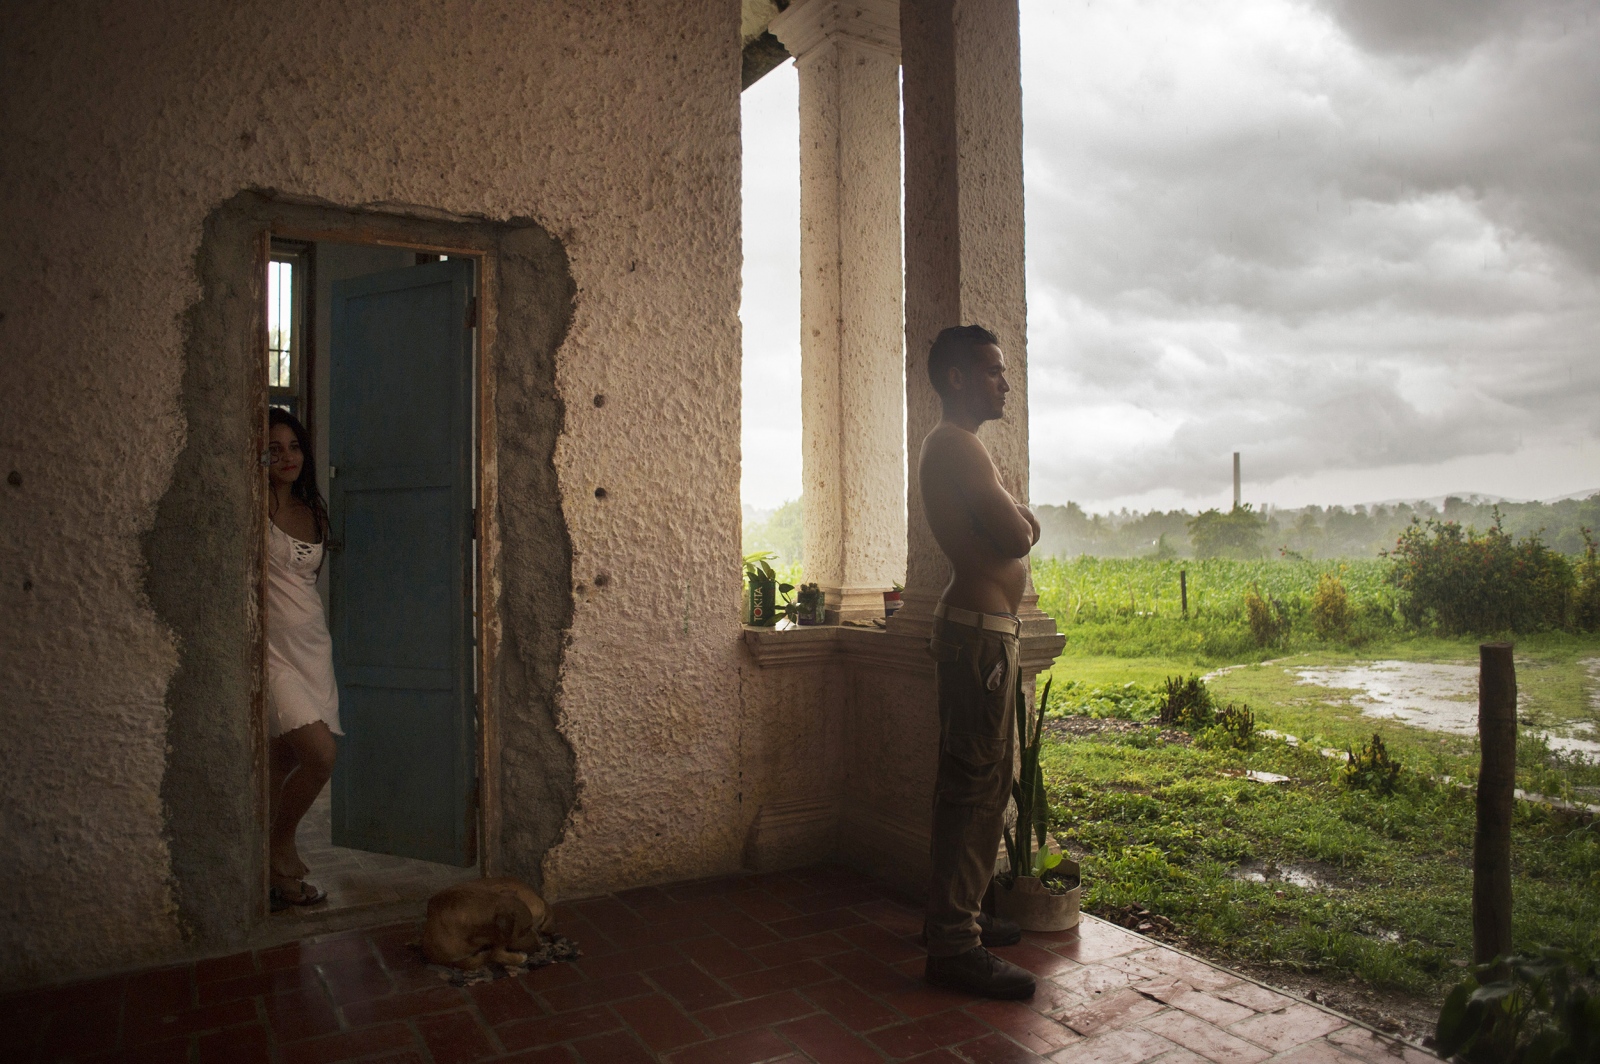 Â¡Cuba Libre! - Several families now occupy what was previously the...